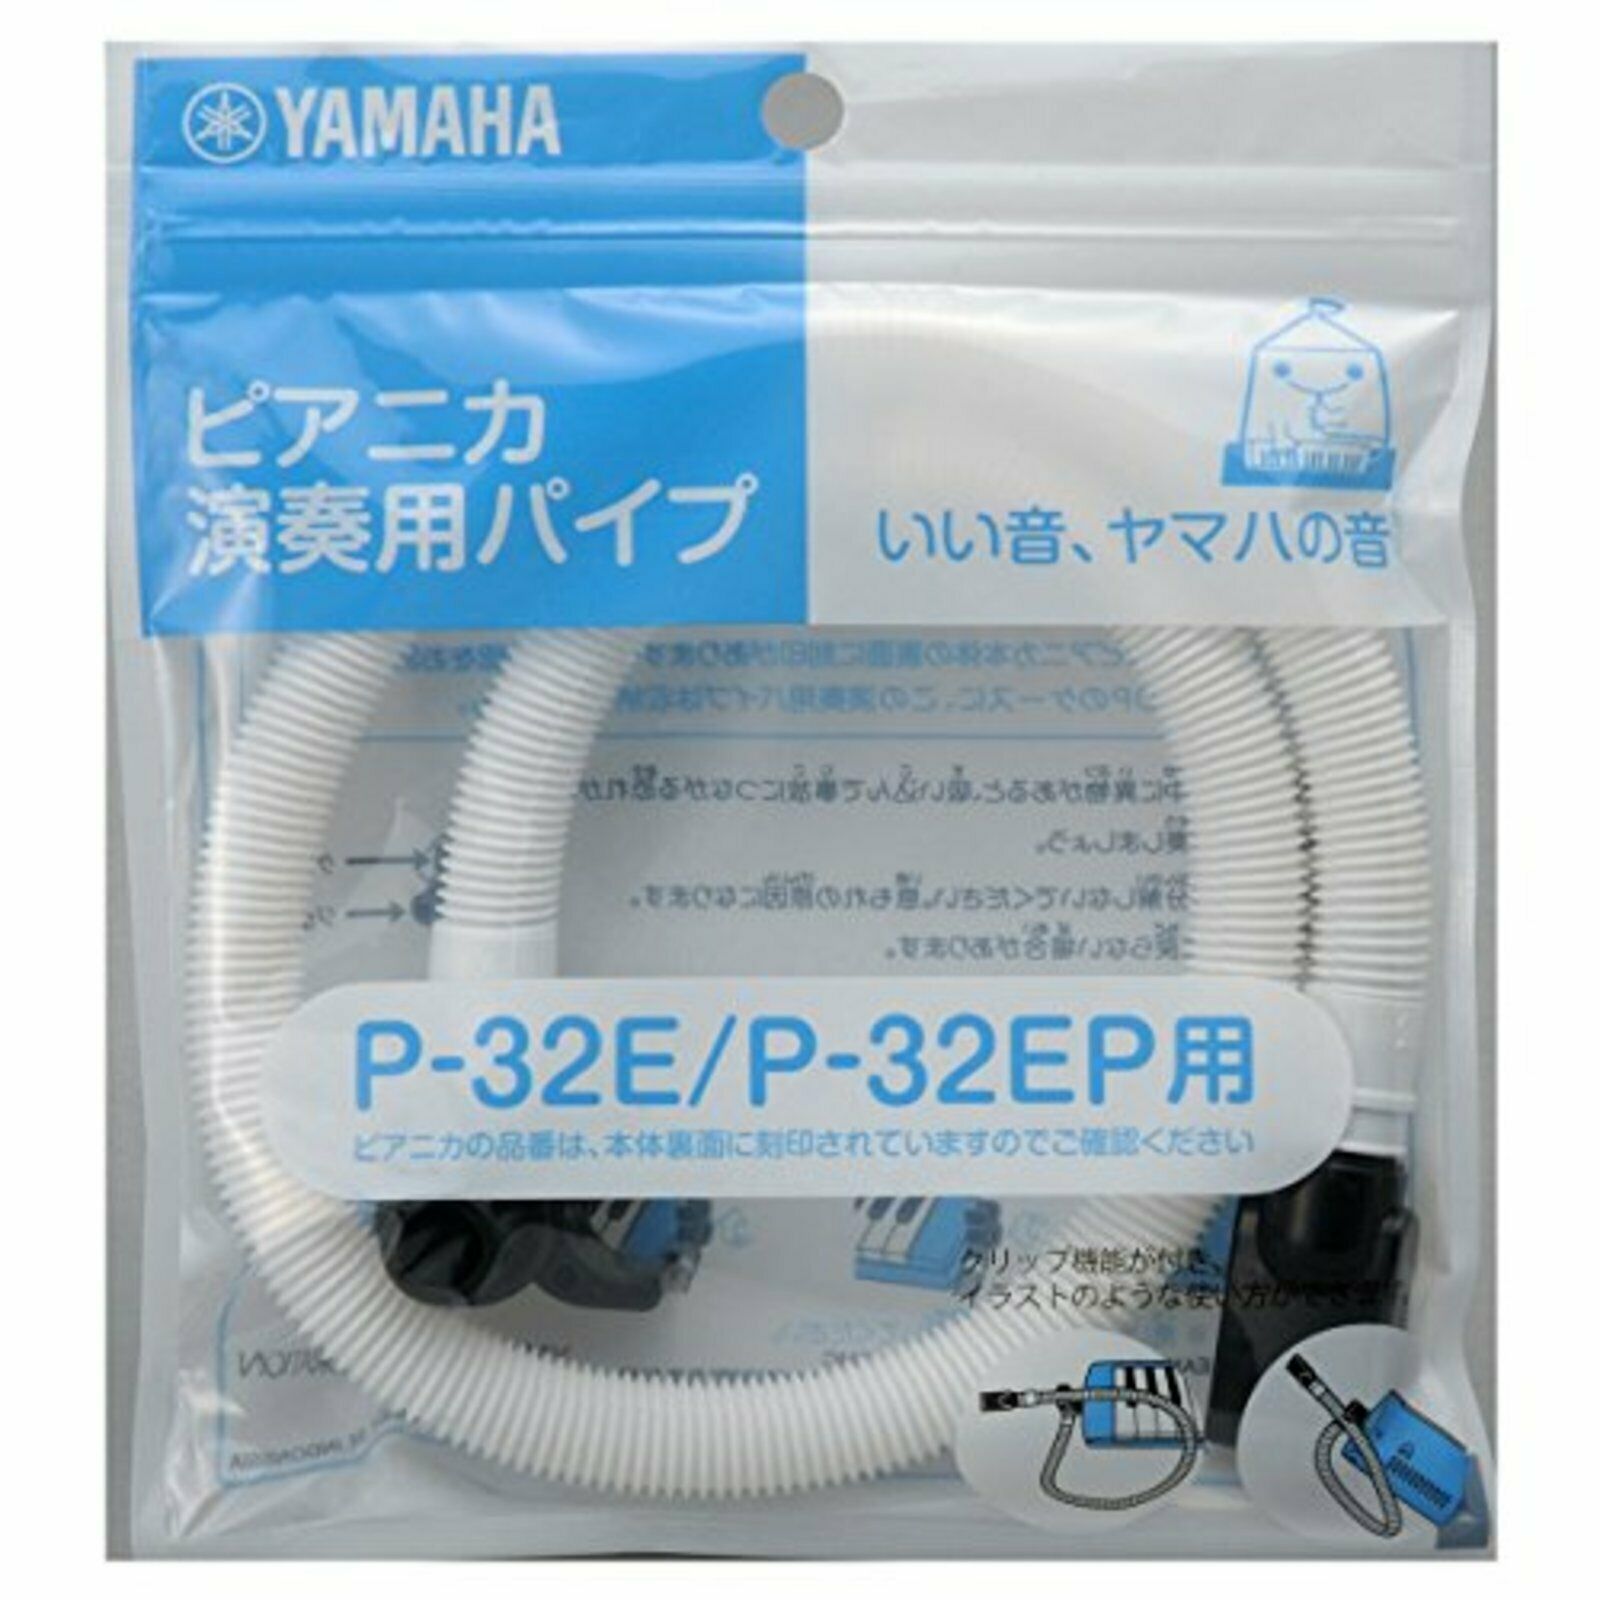 Yamaha Pianica Performance For Pipe Ptp-32e Free Ship W/tracking# New From Japan